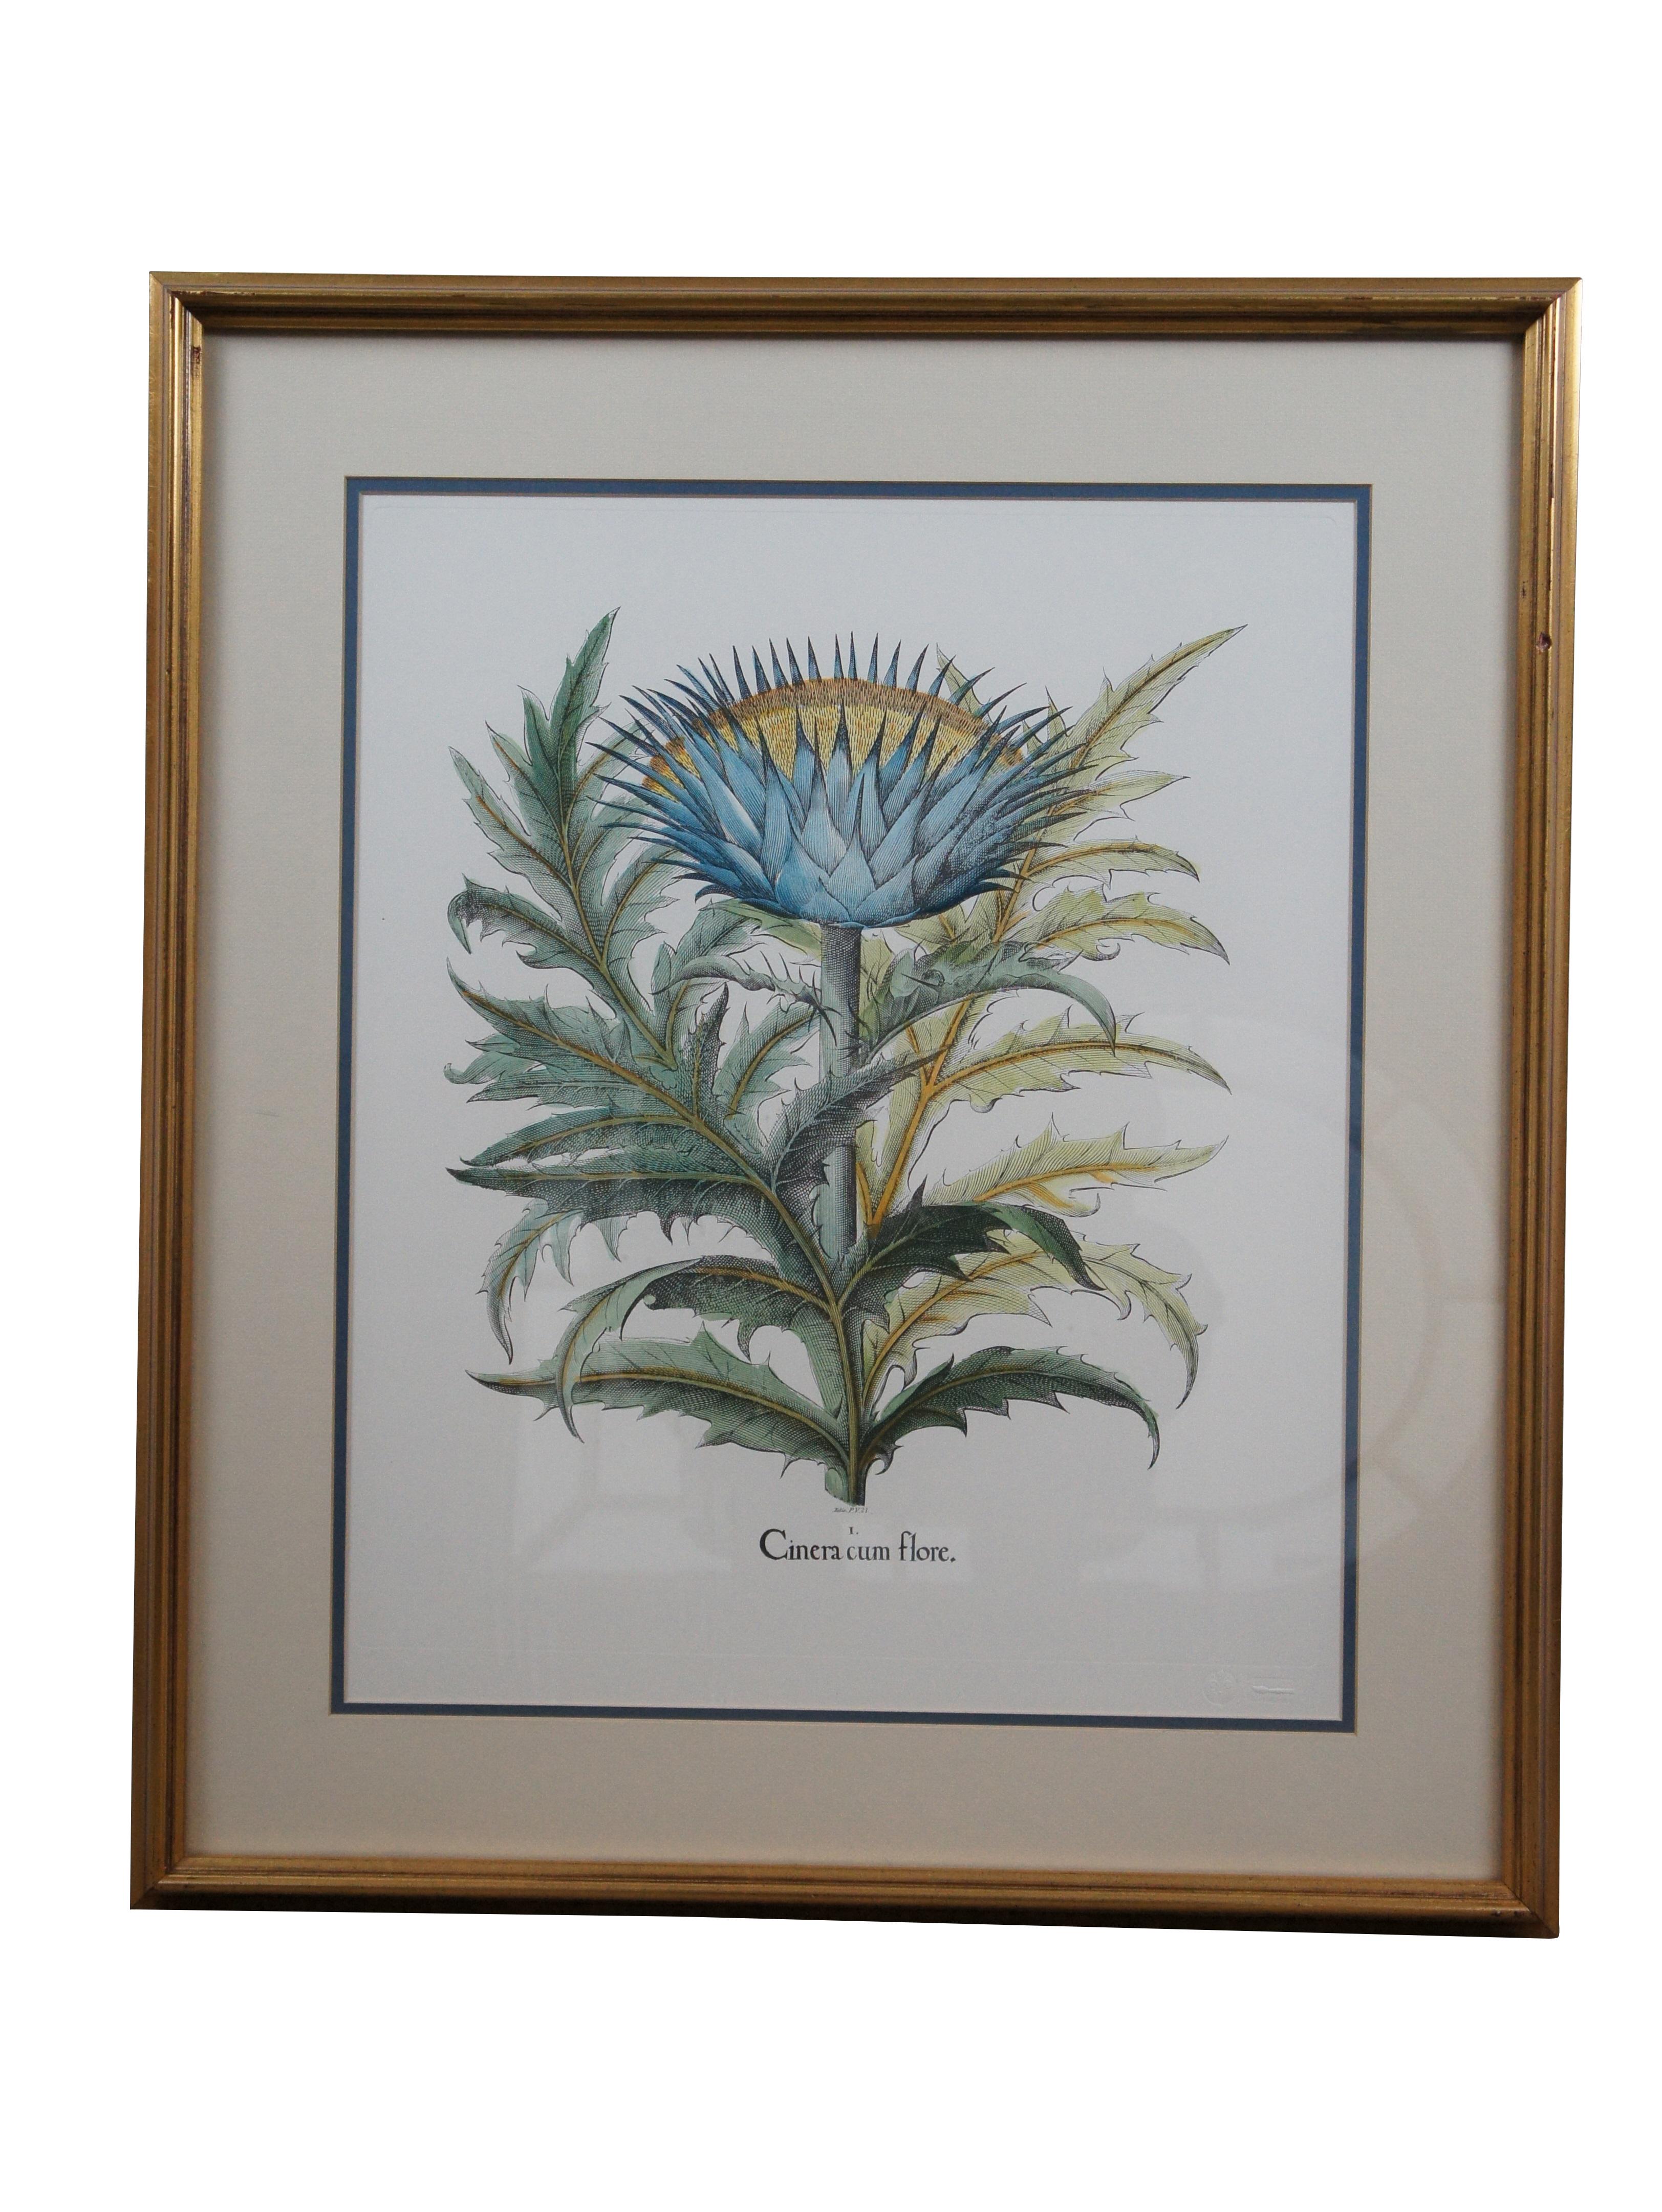 2 Italian Fiorenza Floral Botanical Stramonia Cinera cum Flore Colored Etchings In Good Condition For Sale In Dayton, OH